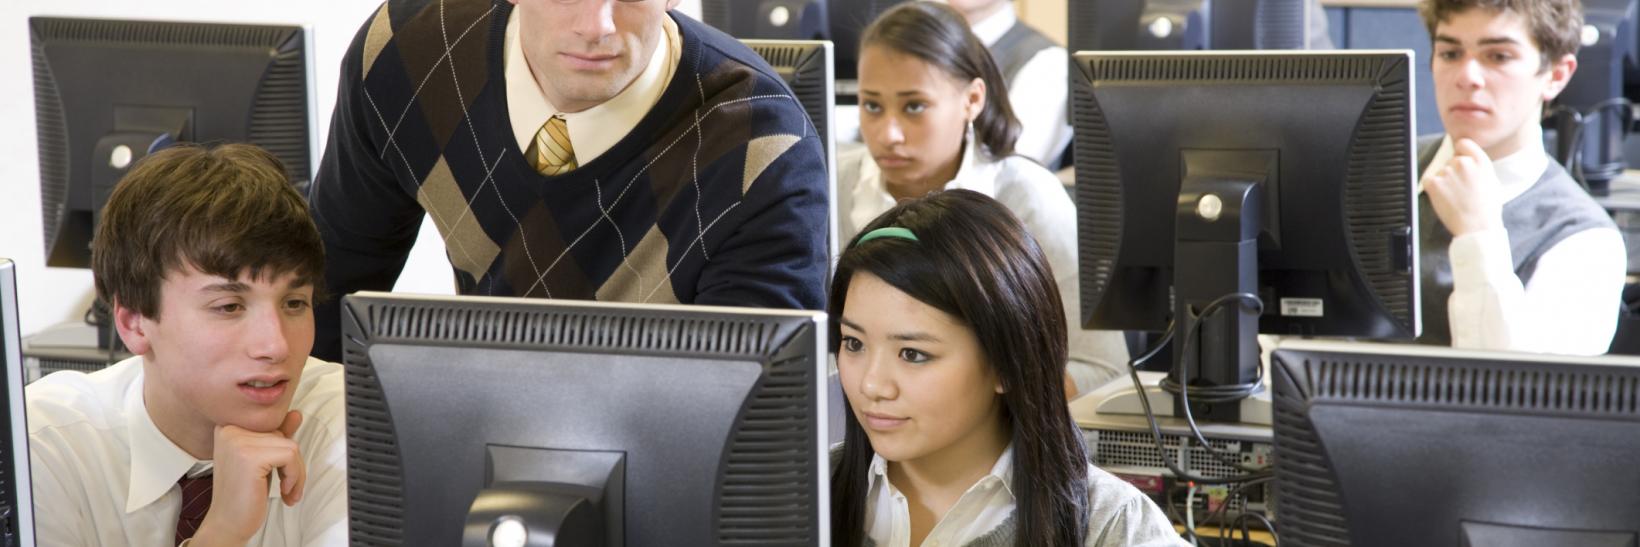 teacher and students in a computer lab